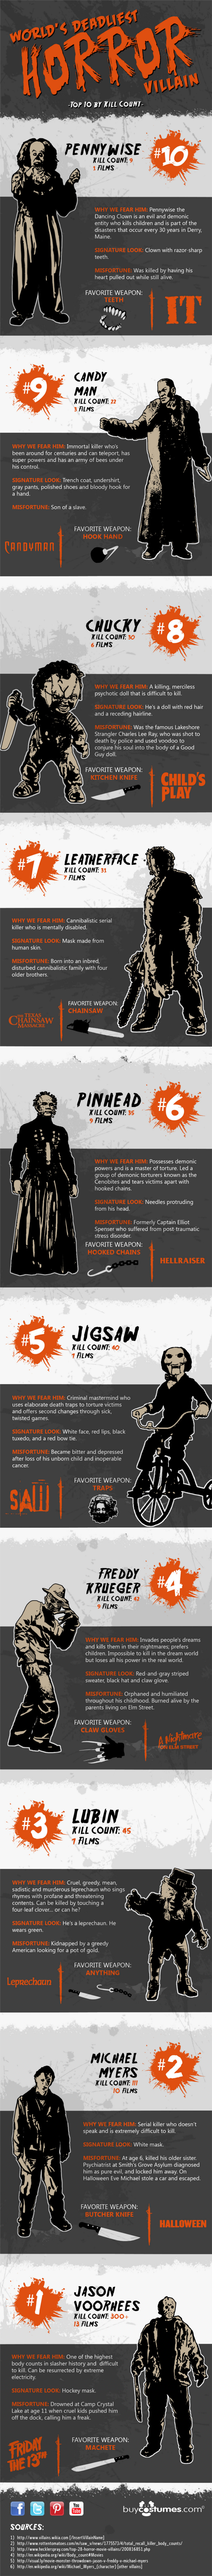 World's Deadliest Horror Villain presented by BuyCostumes